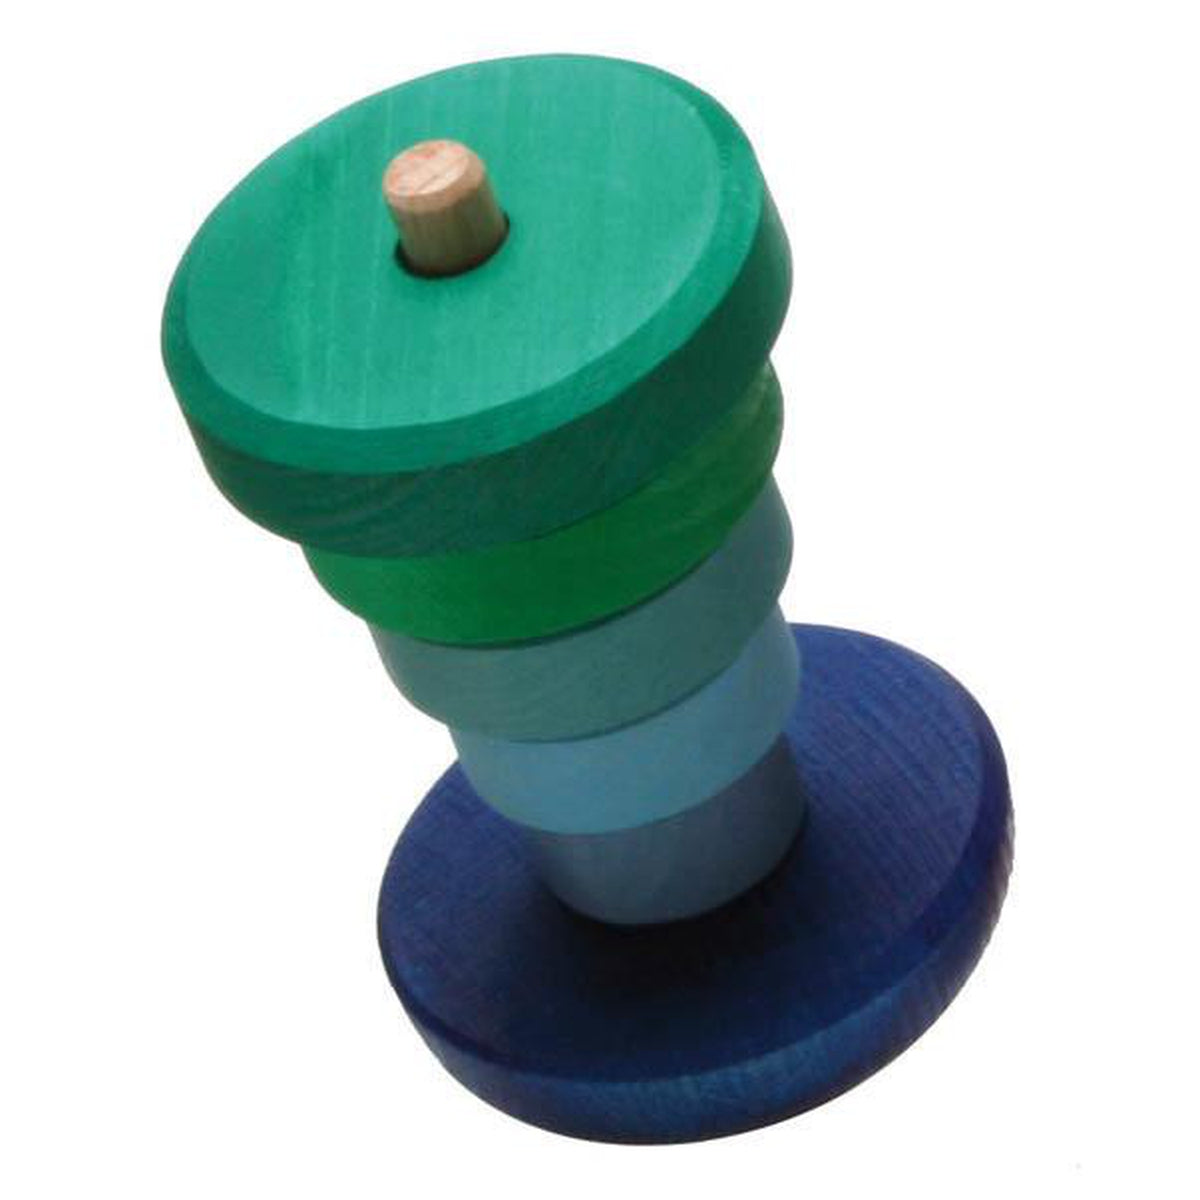 Grimm's wobbly blue stacking tower-baby-Fire the Imagination-Dilly Dally Kids